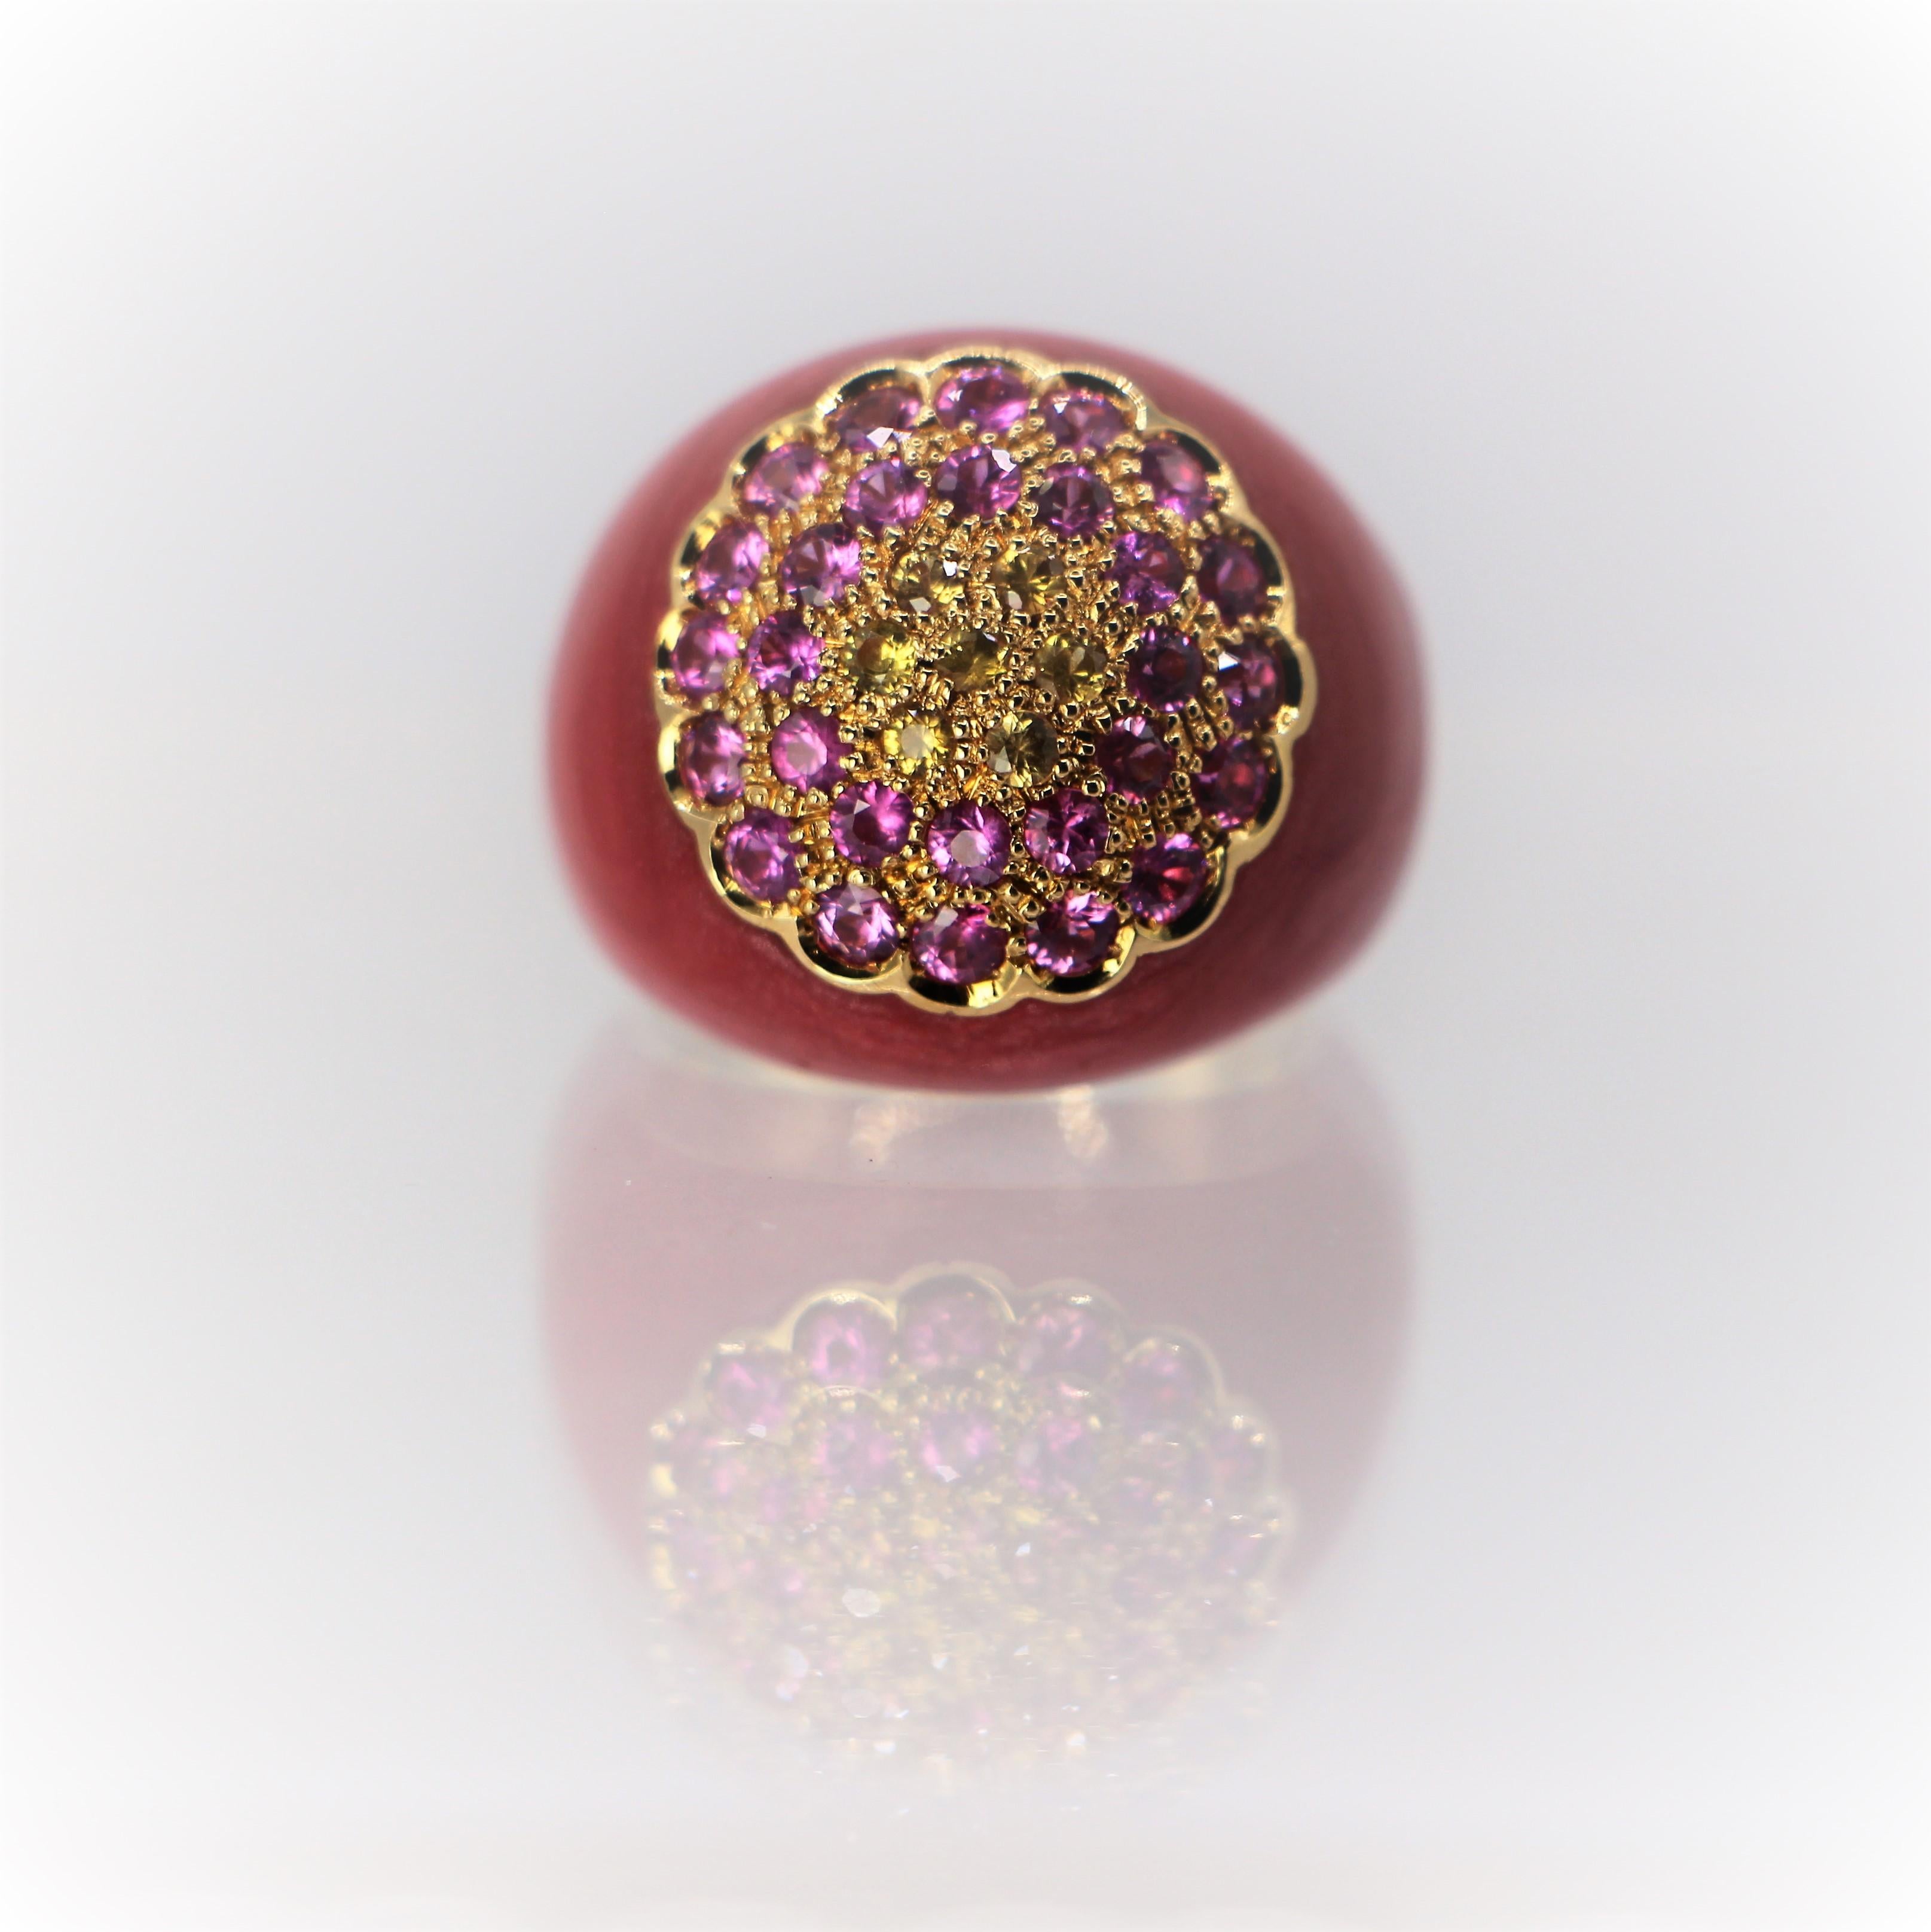 Dome Enamel in Coral red Color ring in 18Kt Gold. A Statement Ring with pink and yellow sapphires.
This stunning ring is handcrafted in 18Kt gold, feature coral color enamel. The enamel on the ring is excelled, it's  the result of a handmade and